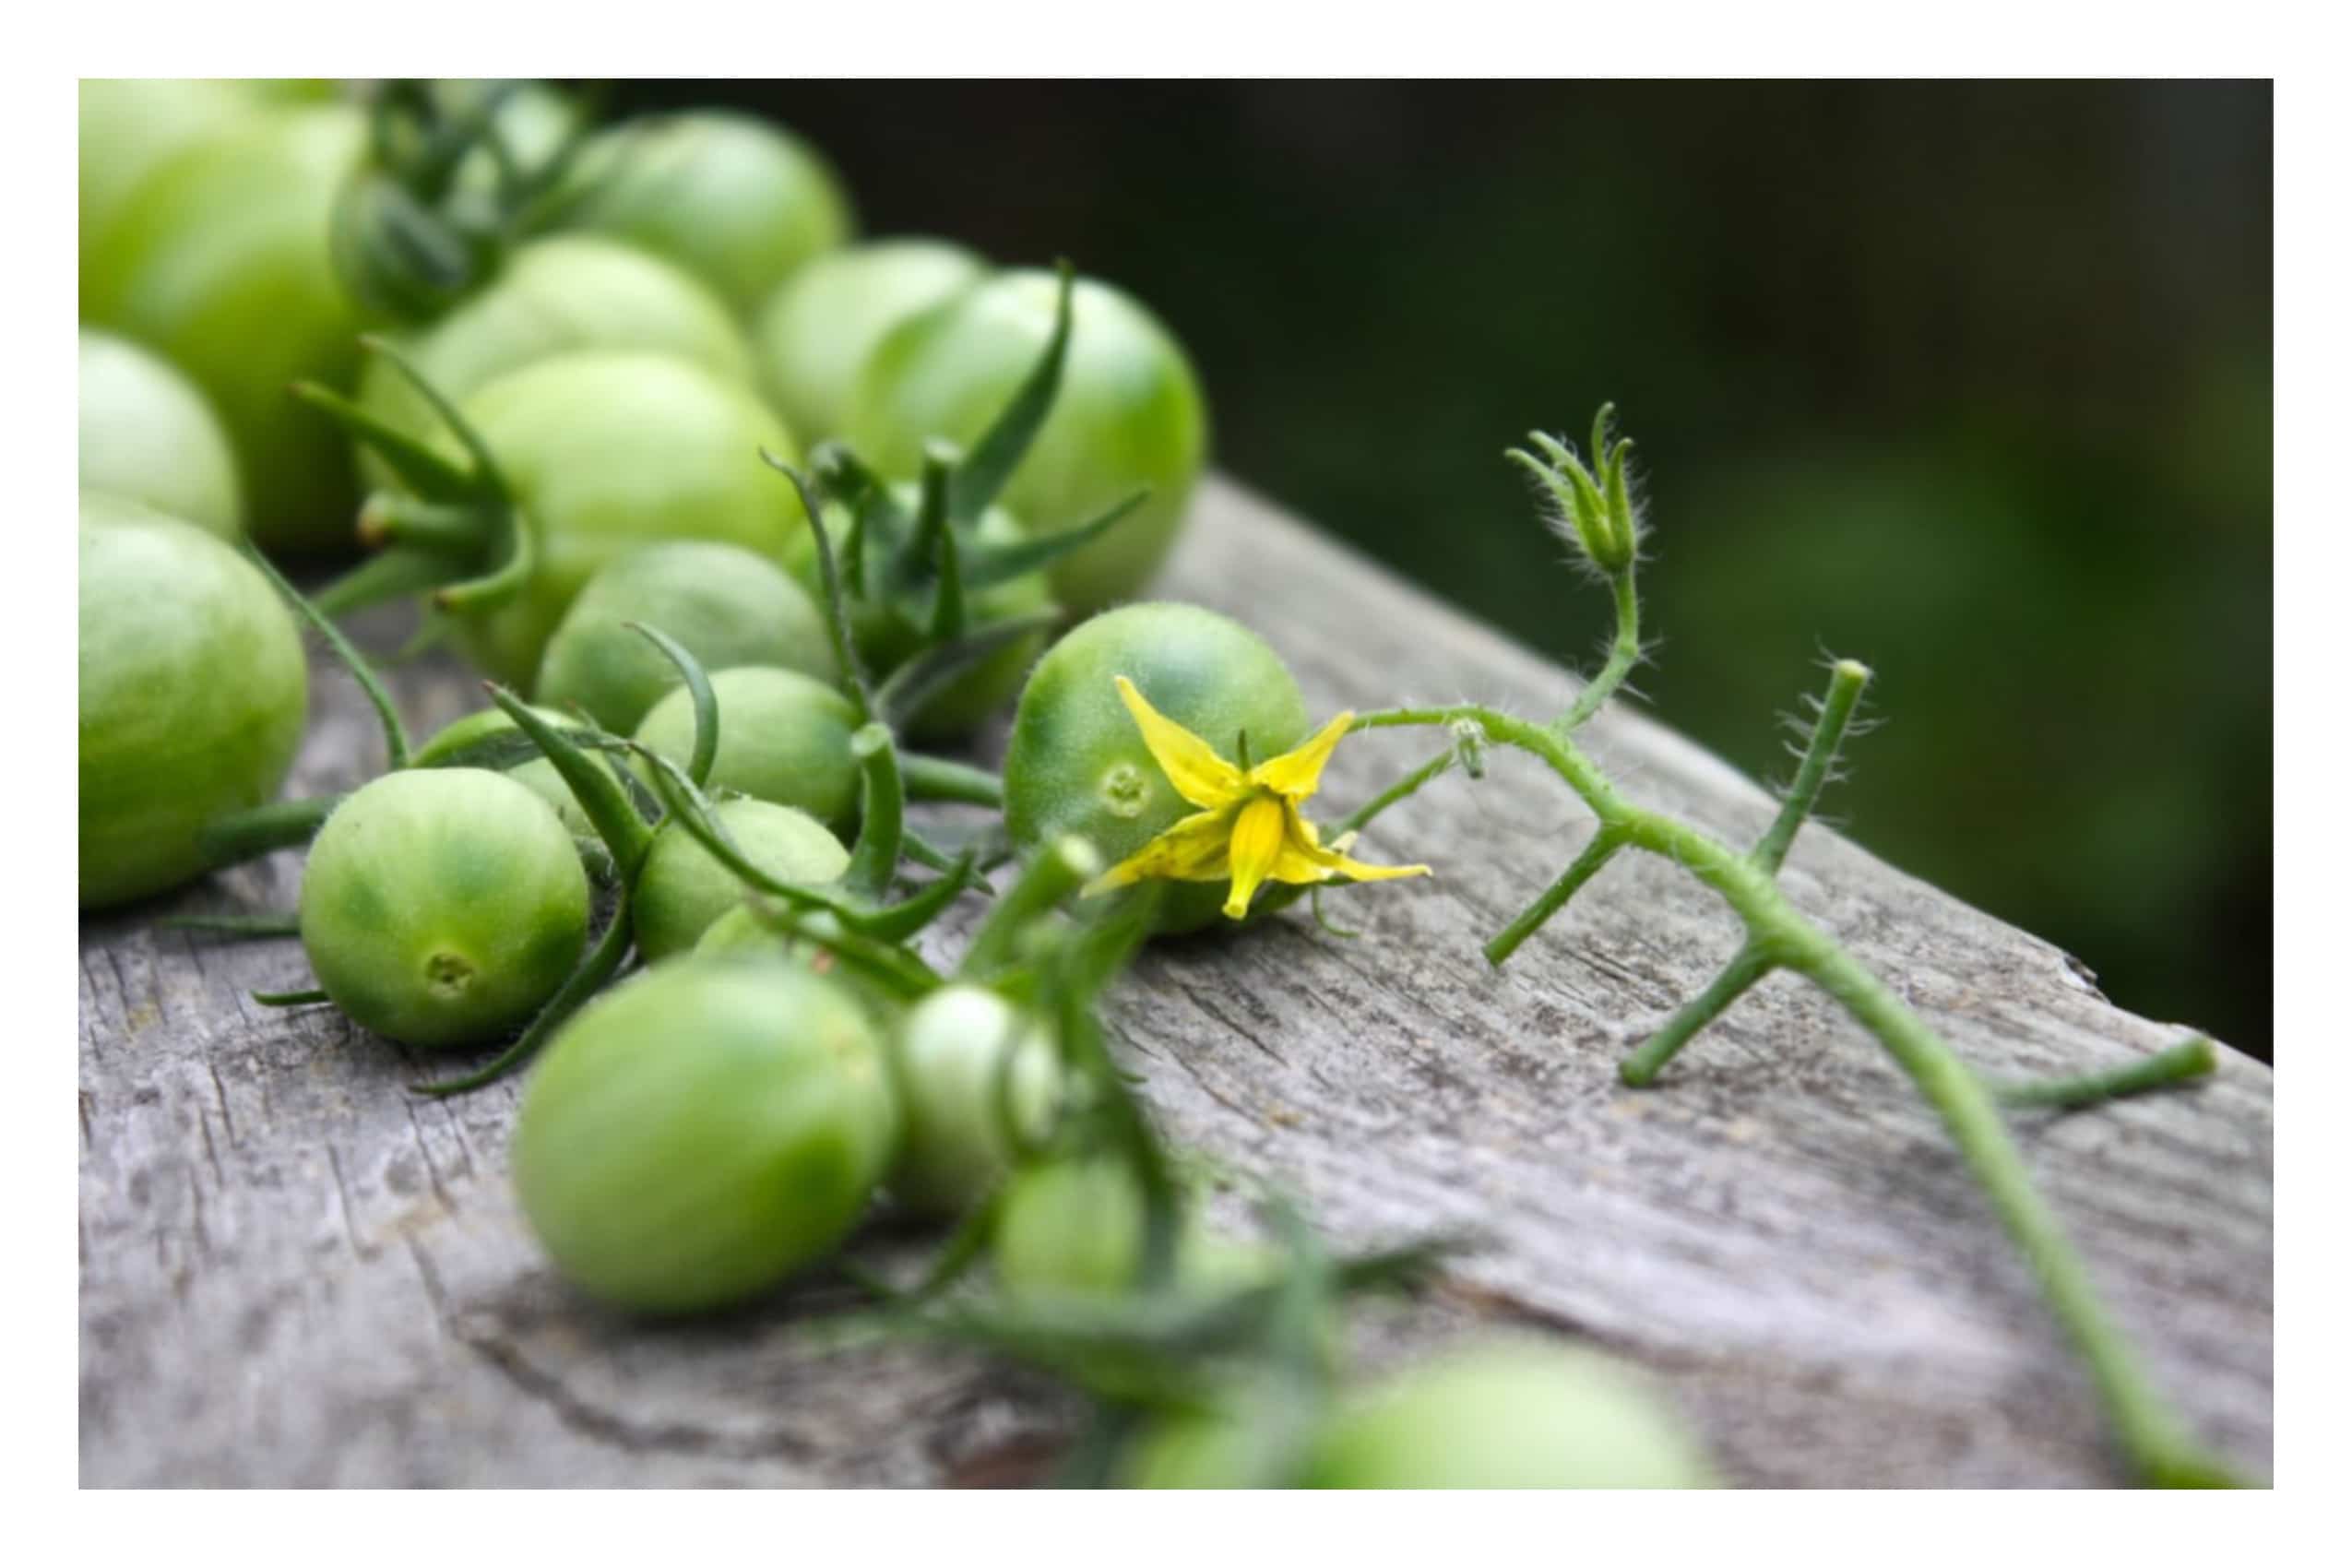 A branch of green tomatoes.